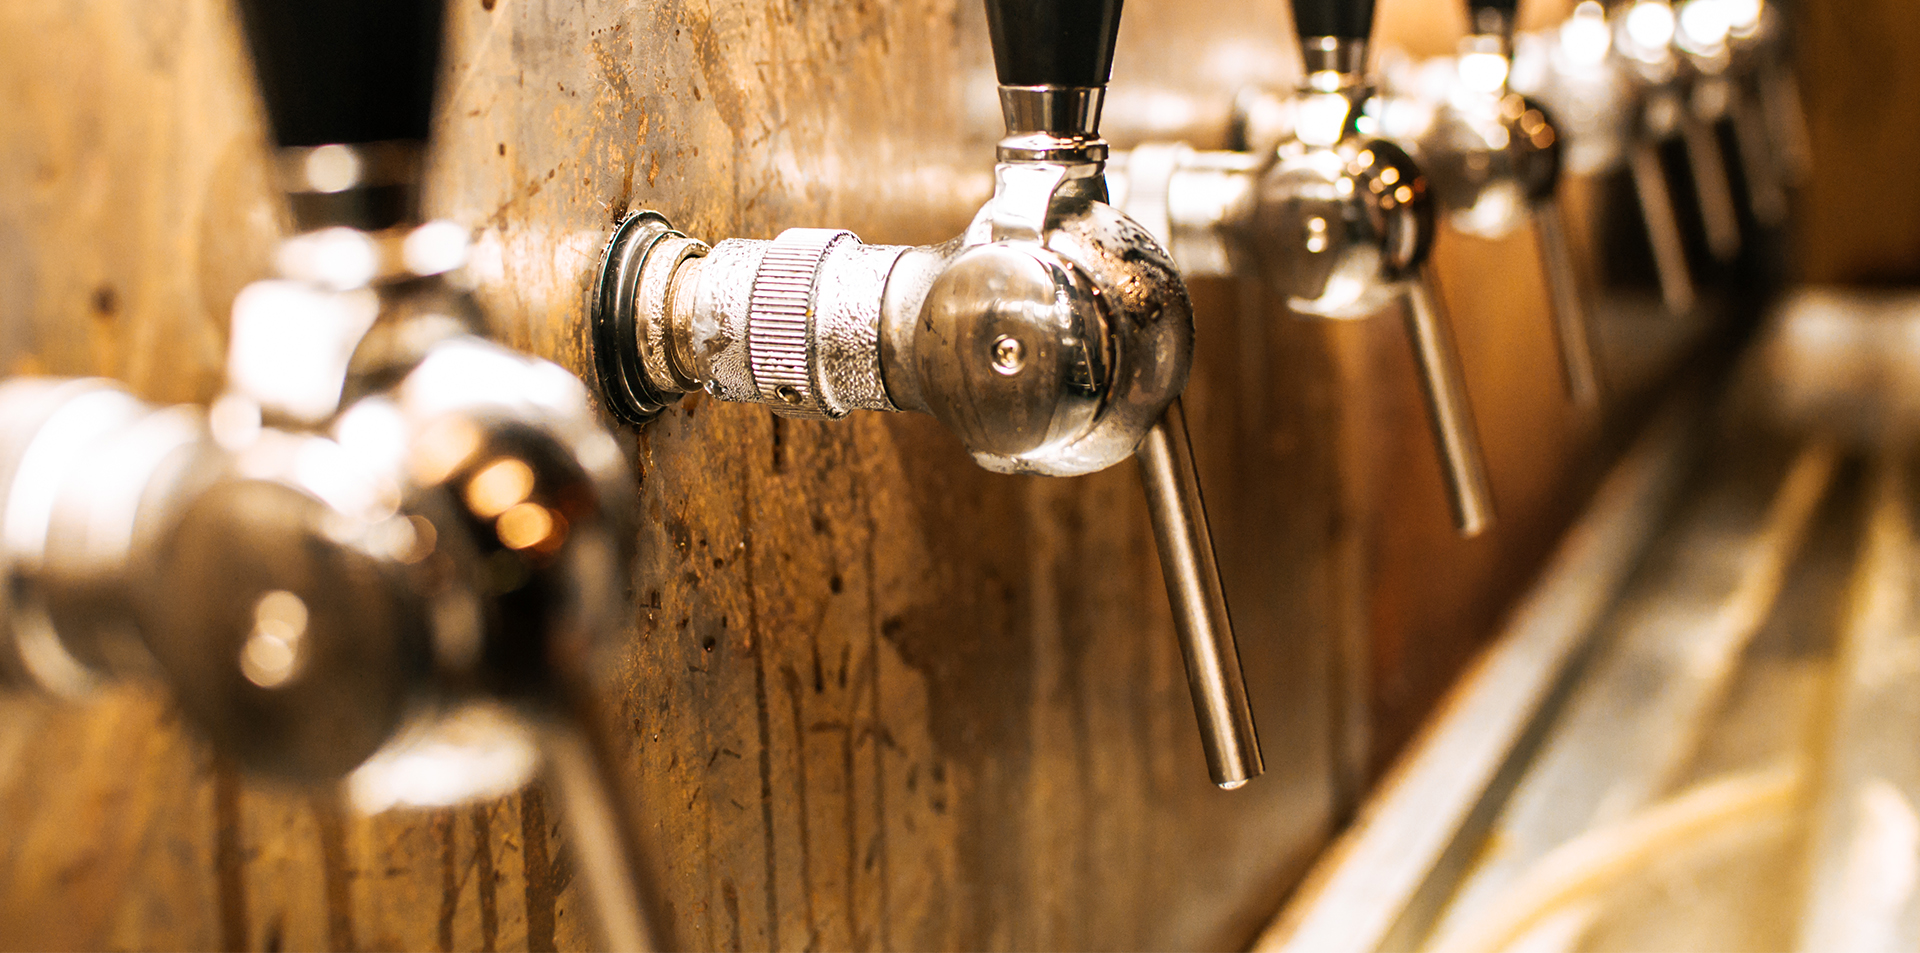 Many taps with a wooden background and black handle